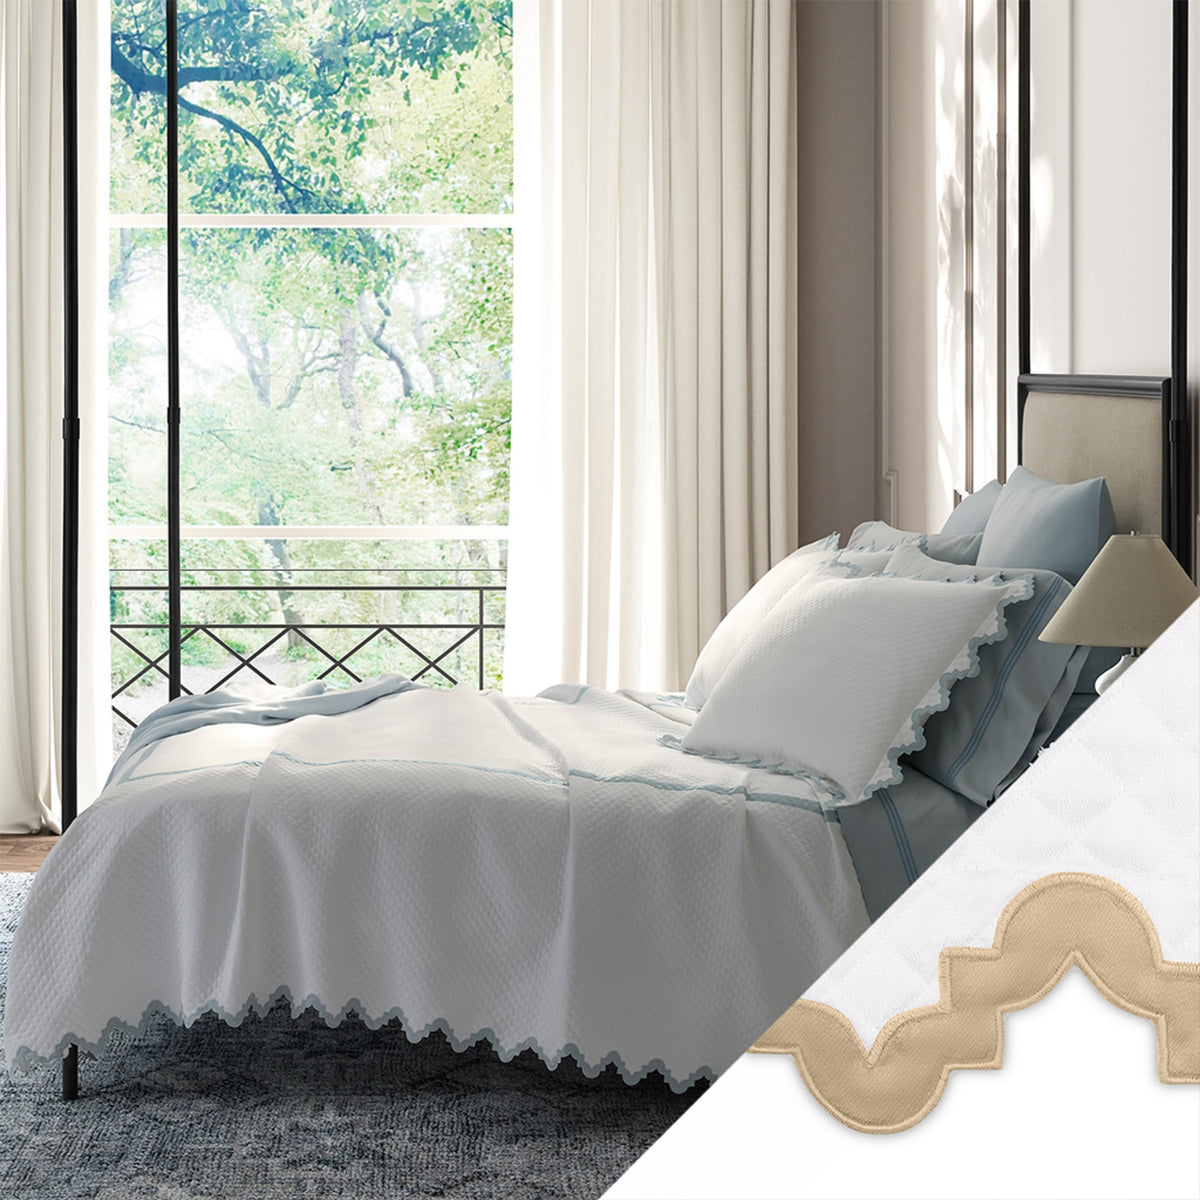 Horizontal View of Matouk Aziza Matelassé Bedding Collection with Swatch in Champagne Color